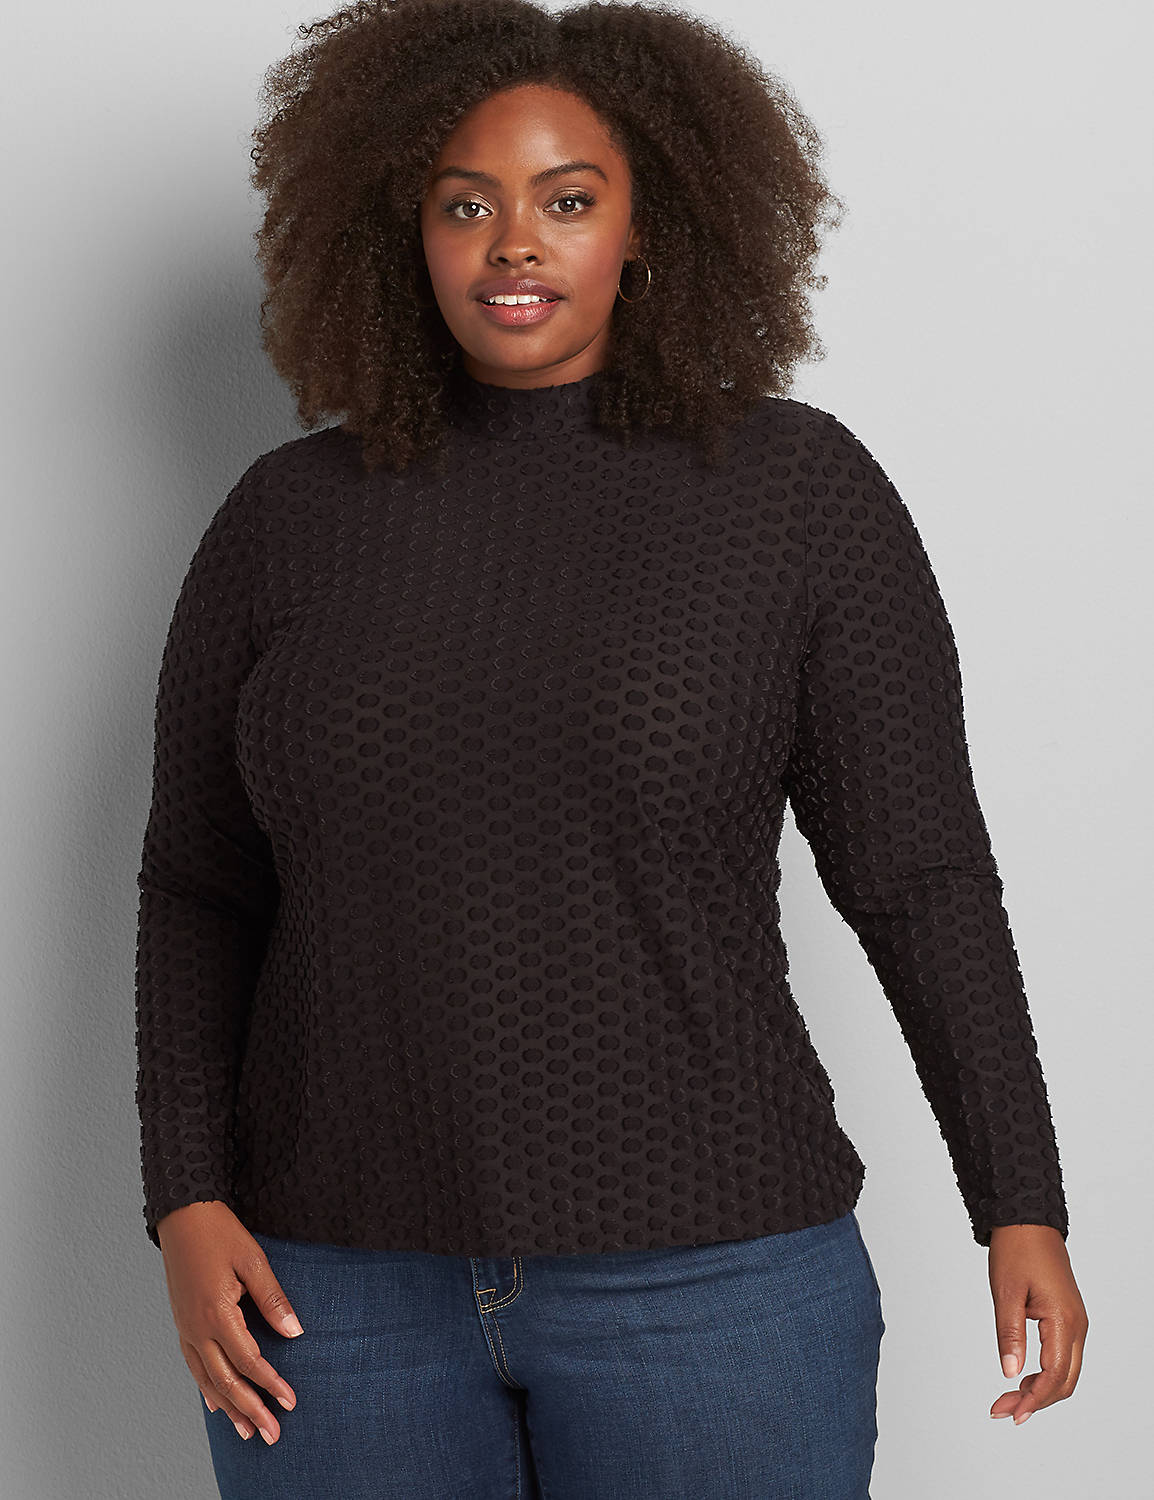 Long Sleeve Mock Neck Fitted Clip Dot Top 1117018:Pitch Black LB 1000322:18/20 Product Image 1